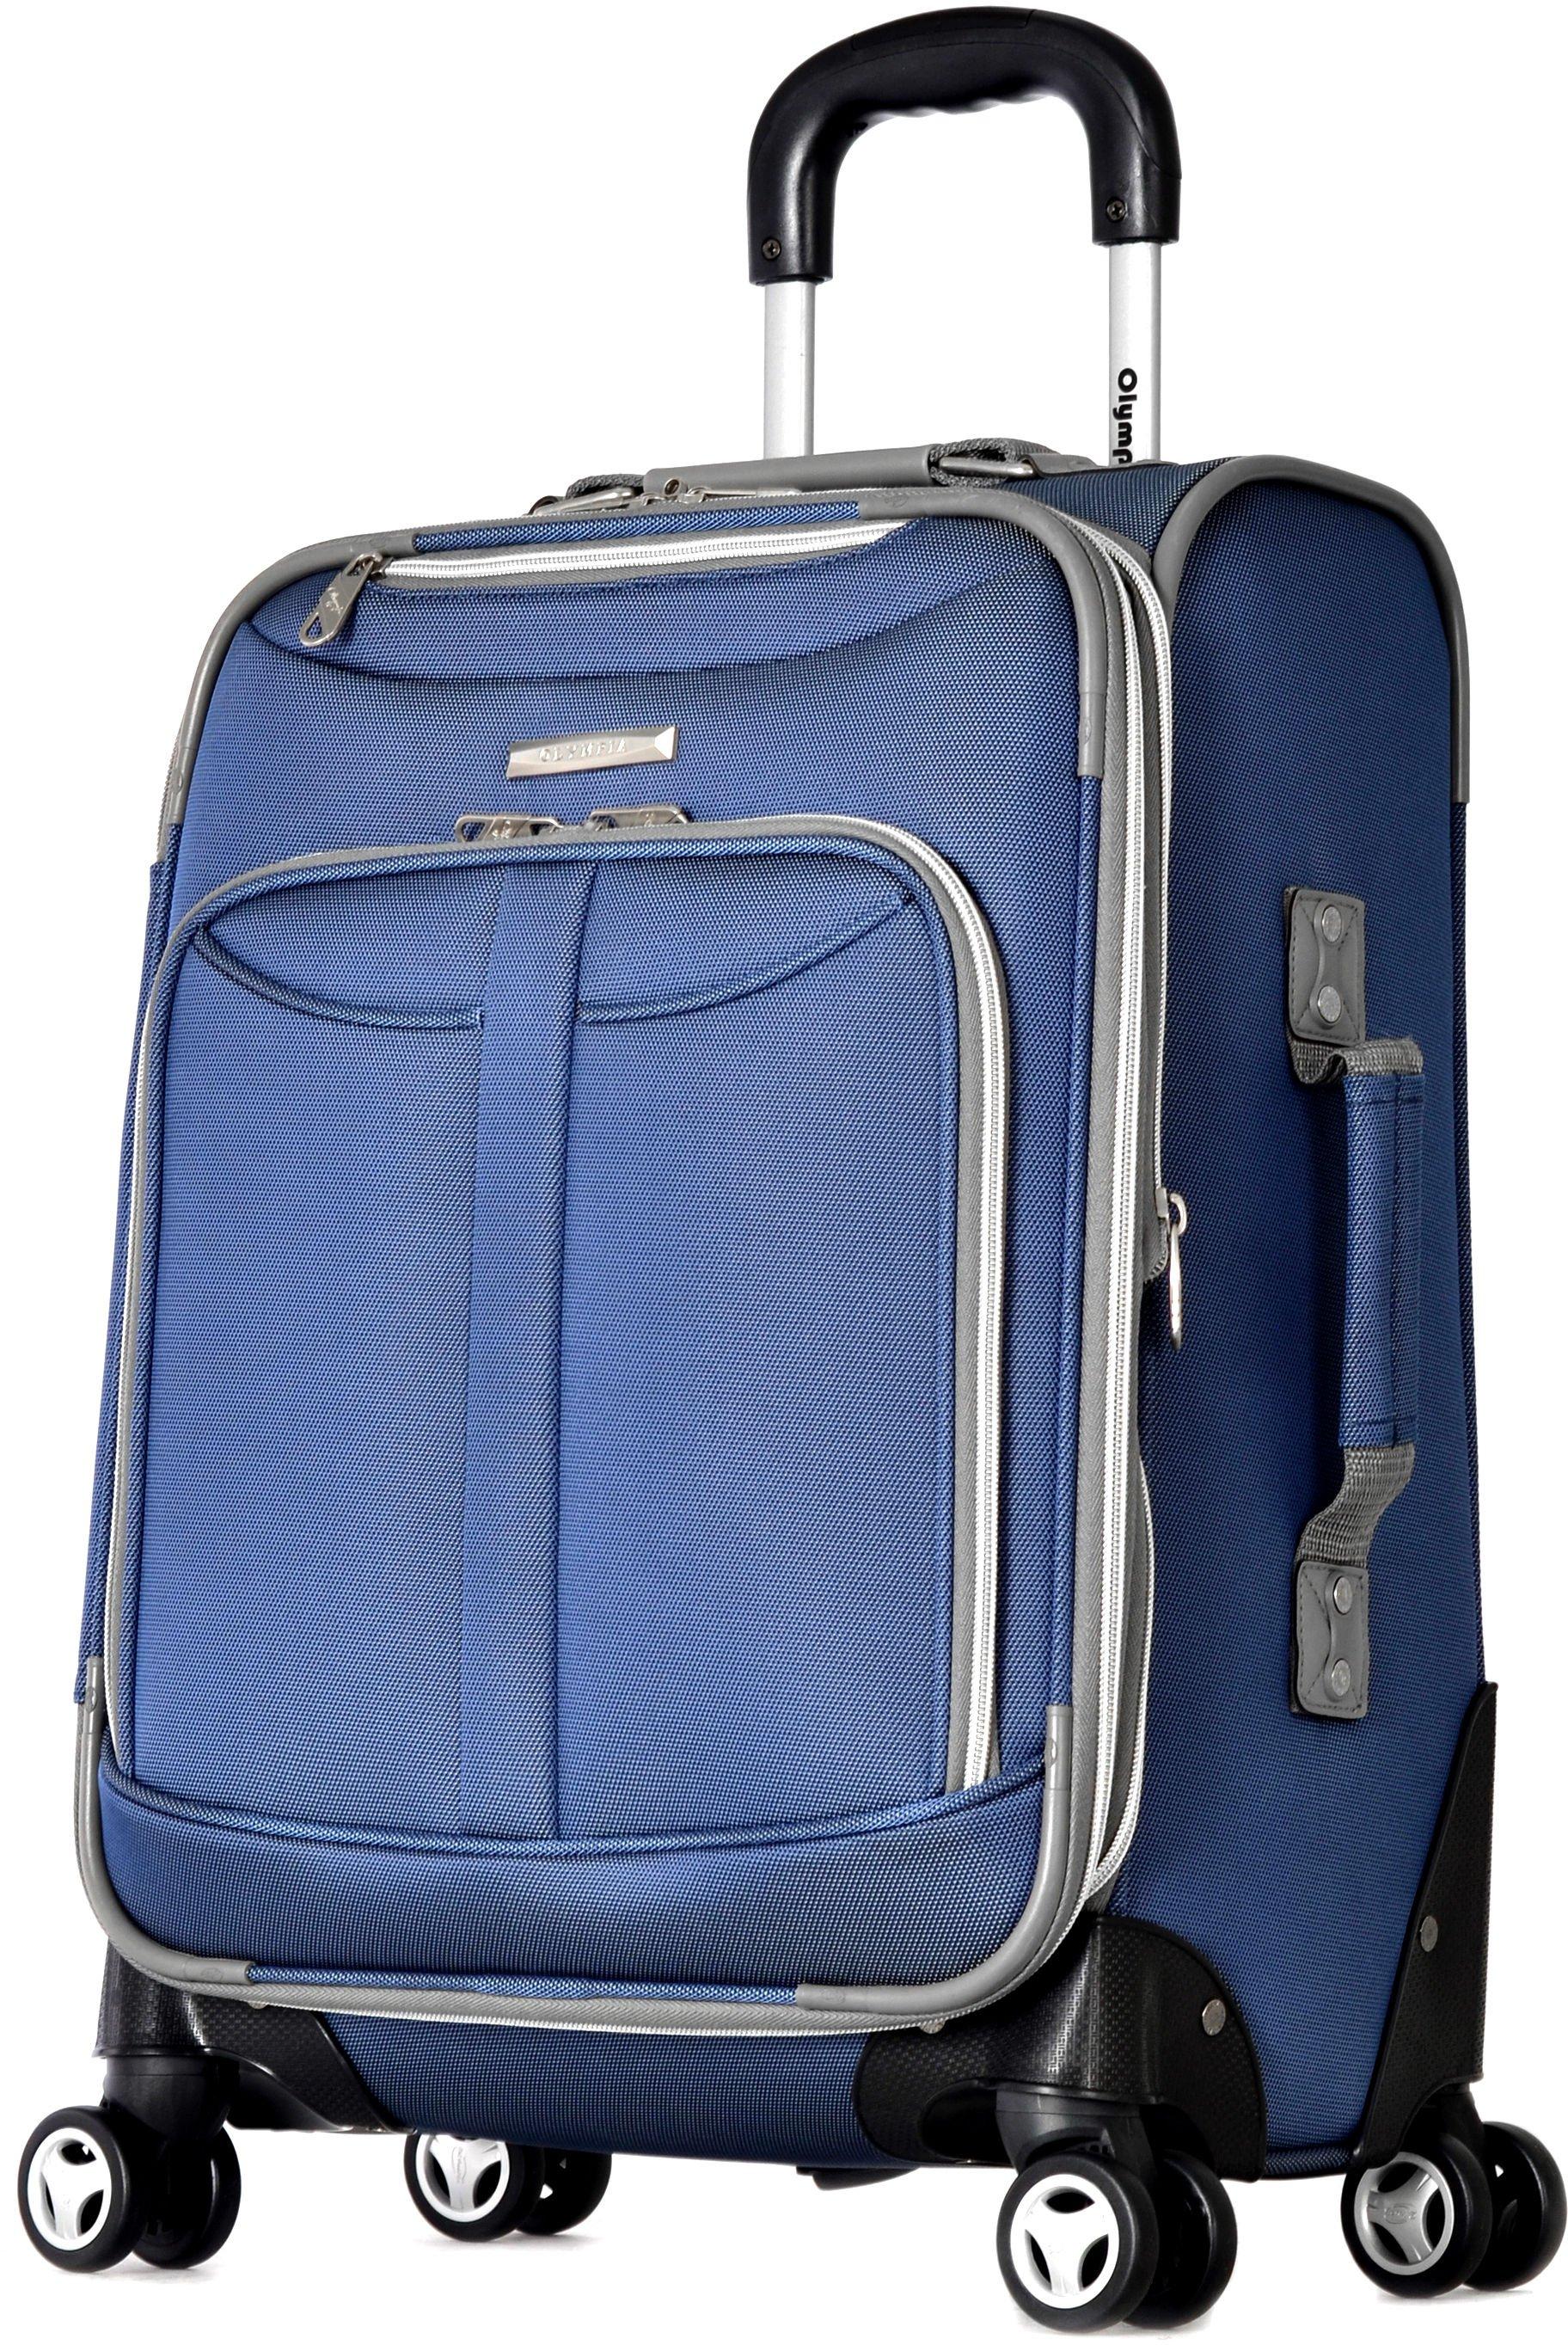 Tuscany 21 Inch Spinner Luggage